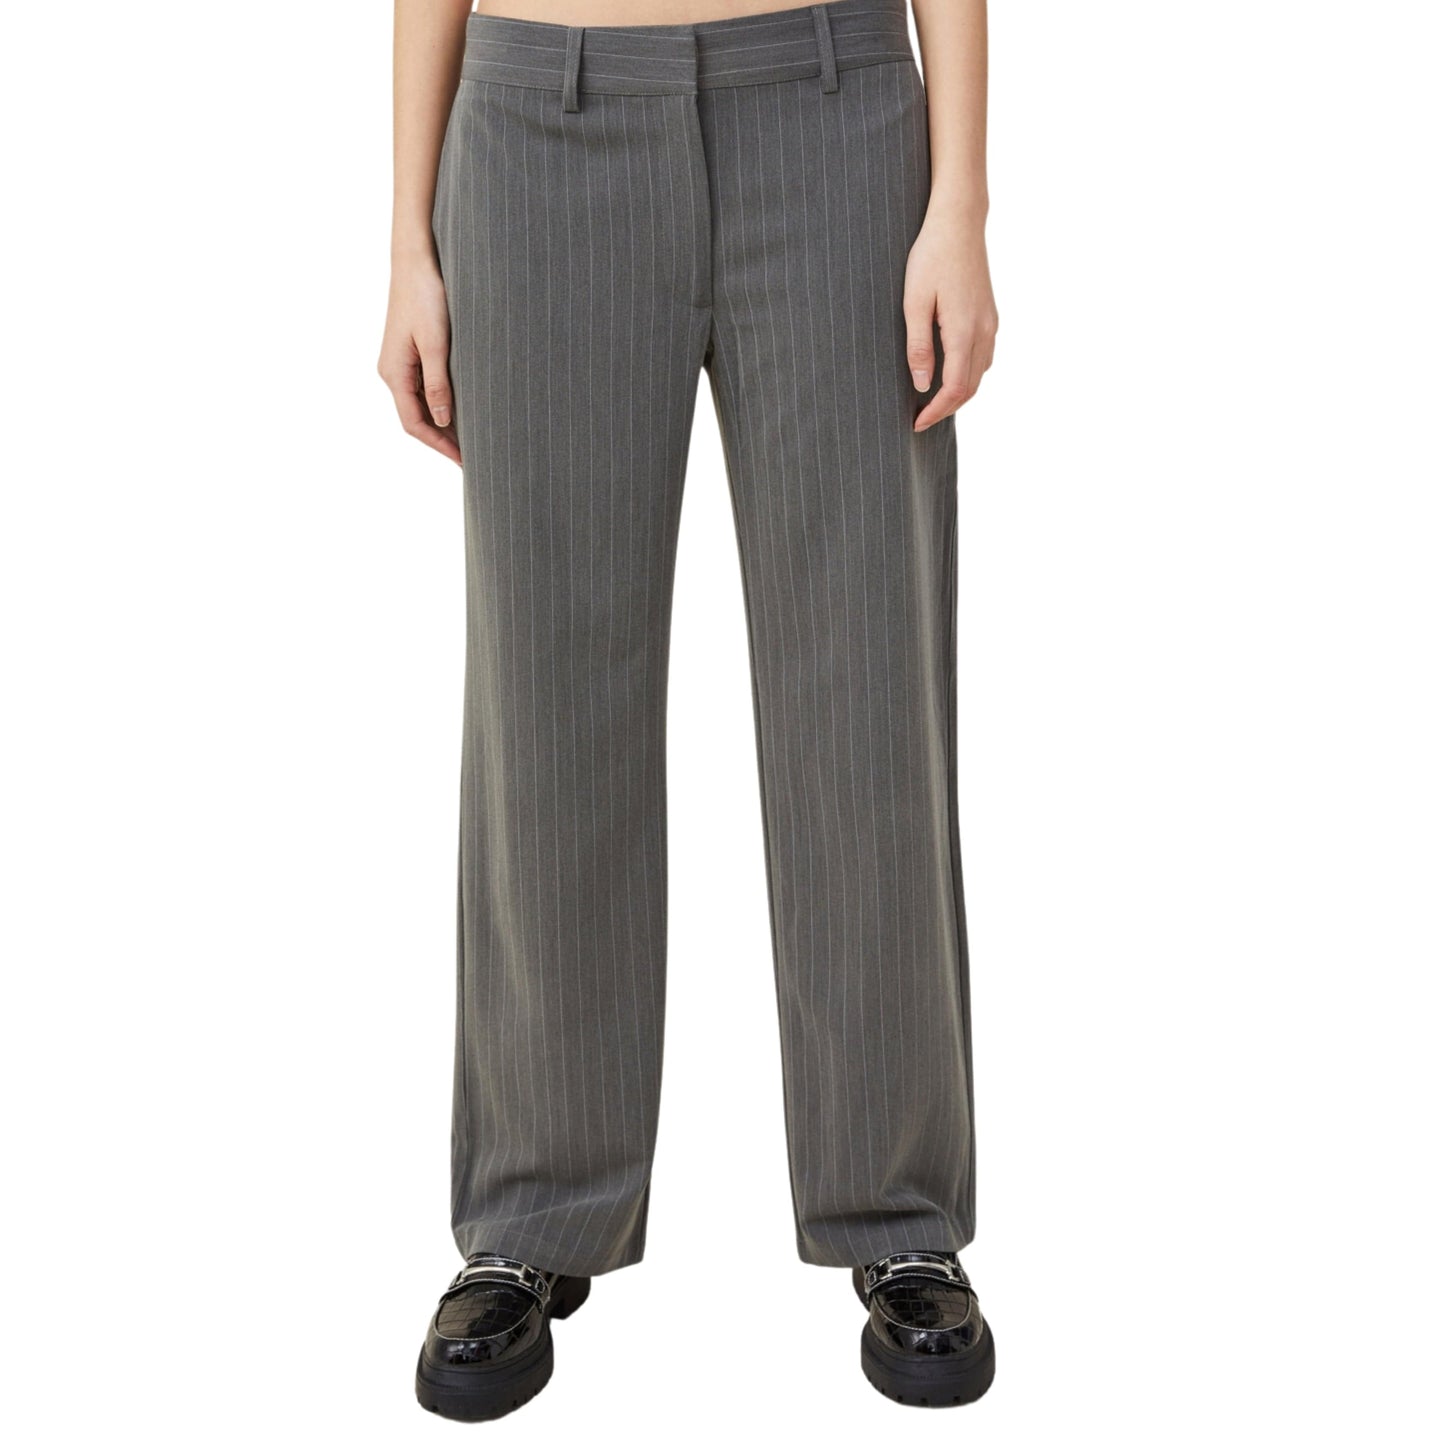 COTTON ON Womens Bottoms S / Grey COTTON ON - Jessie Low Rise Pants